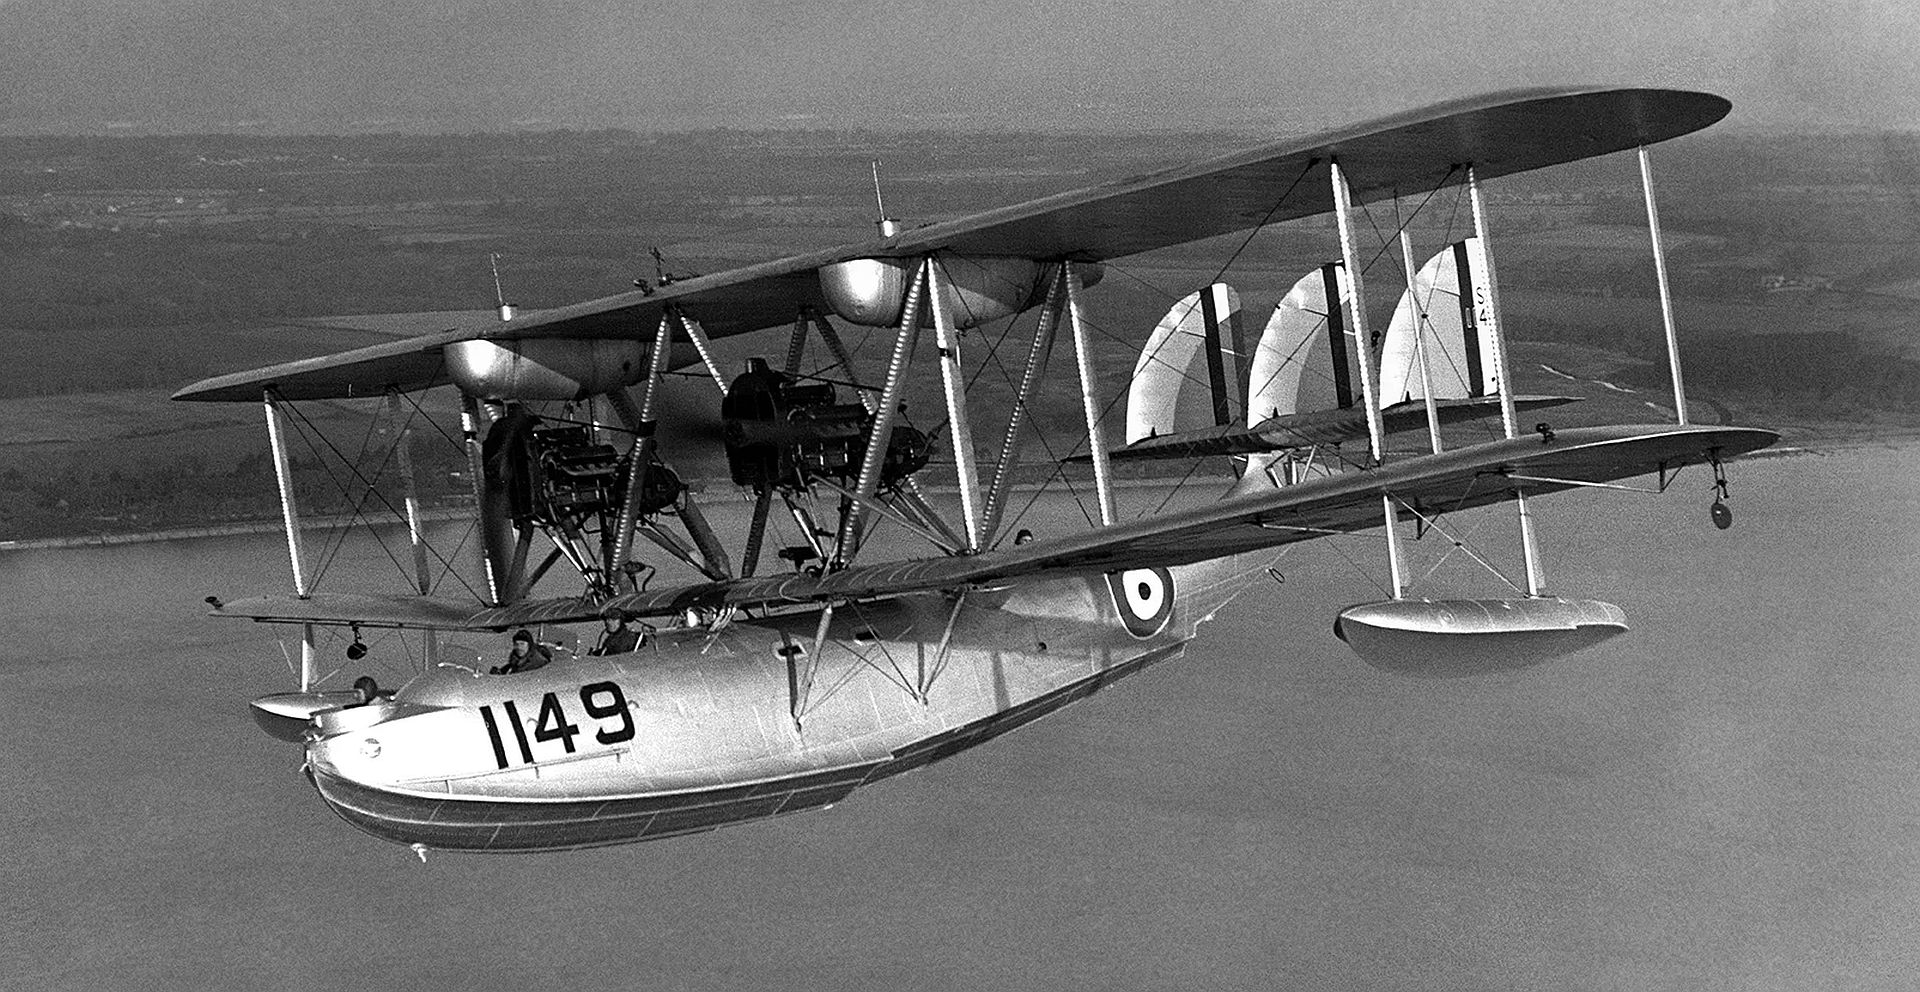 Southampton II S1149 Airborne From Mount Batten The RAF Flying Boat Base On Plymouth Sound In August 1935